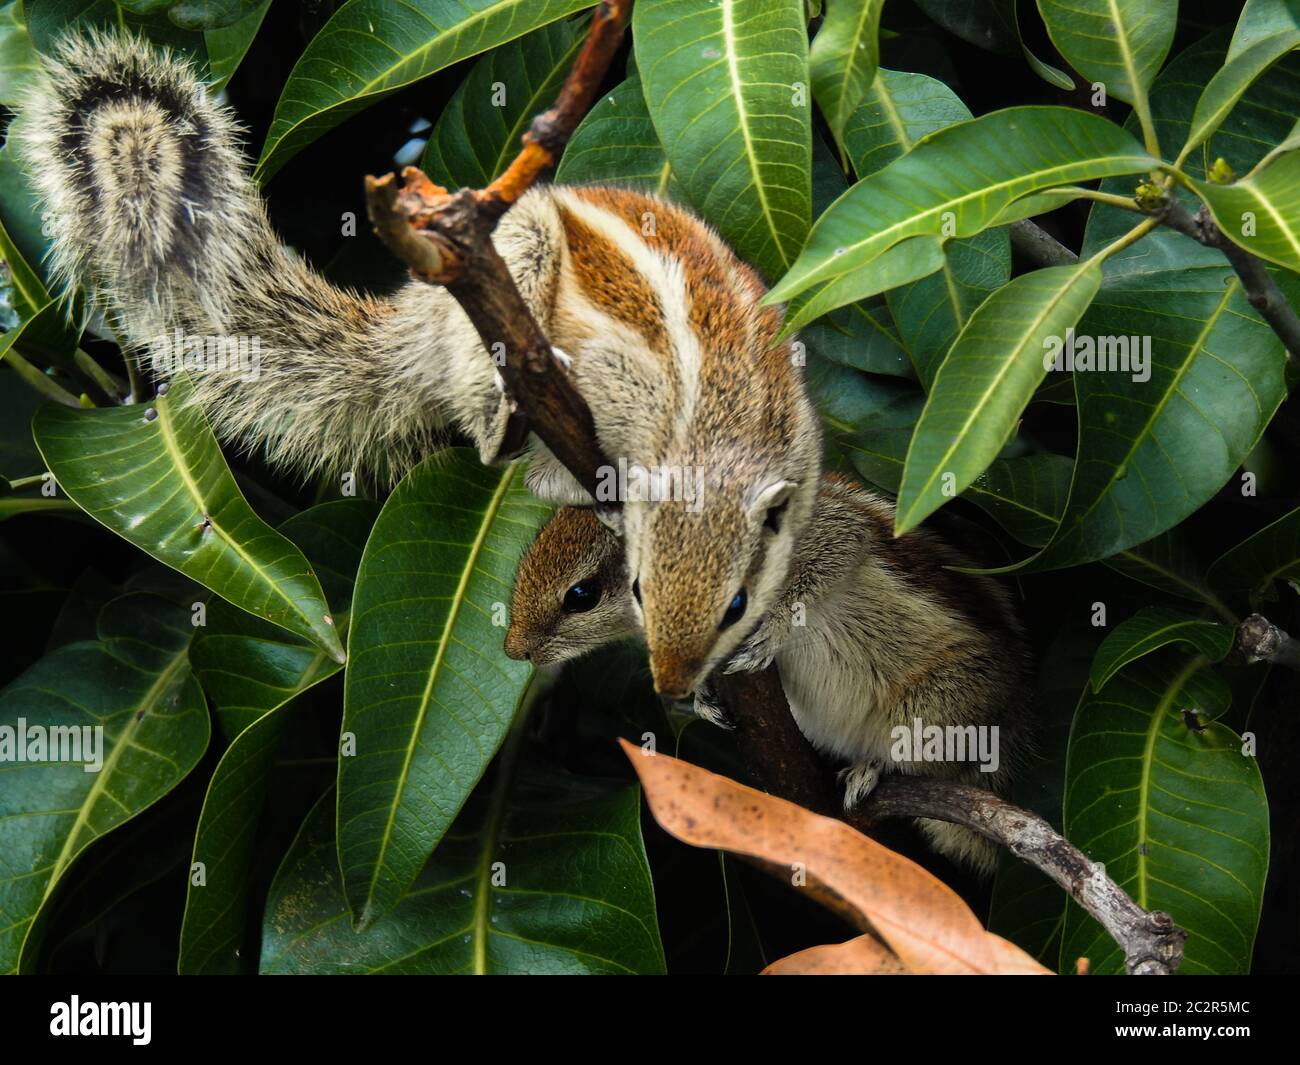 The Indian palm squirrel or three-striped palm squirrel is a species of rodent in the family Sciuridae found naturally in India and Sri Lanka. Stock Photo